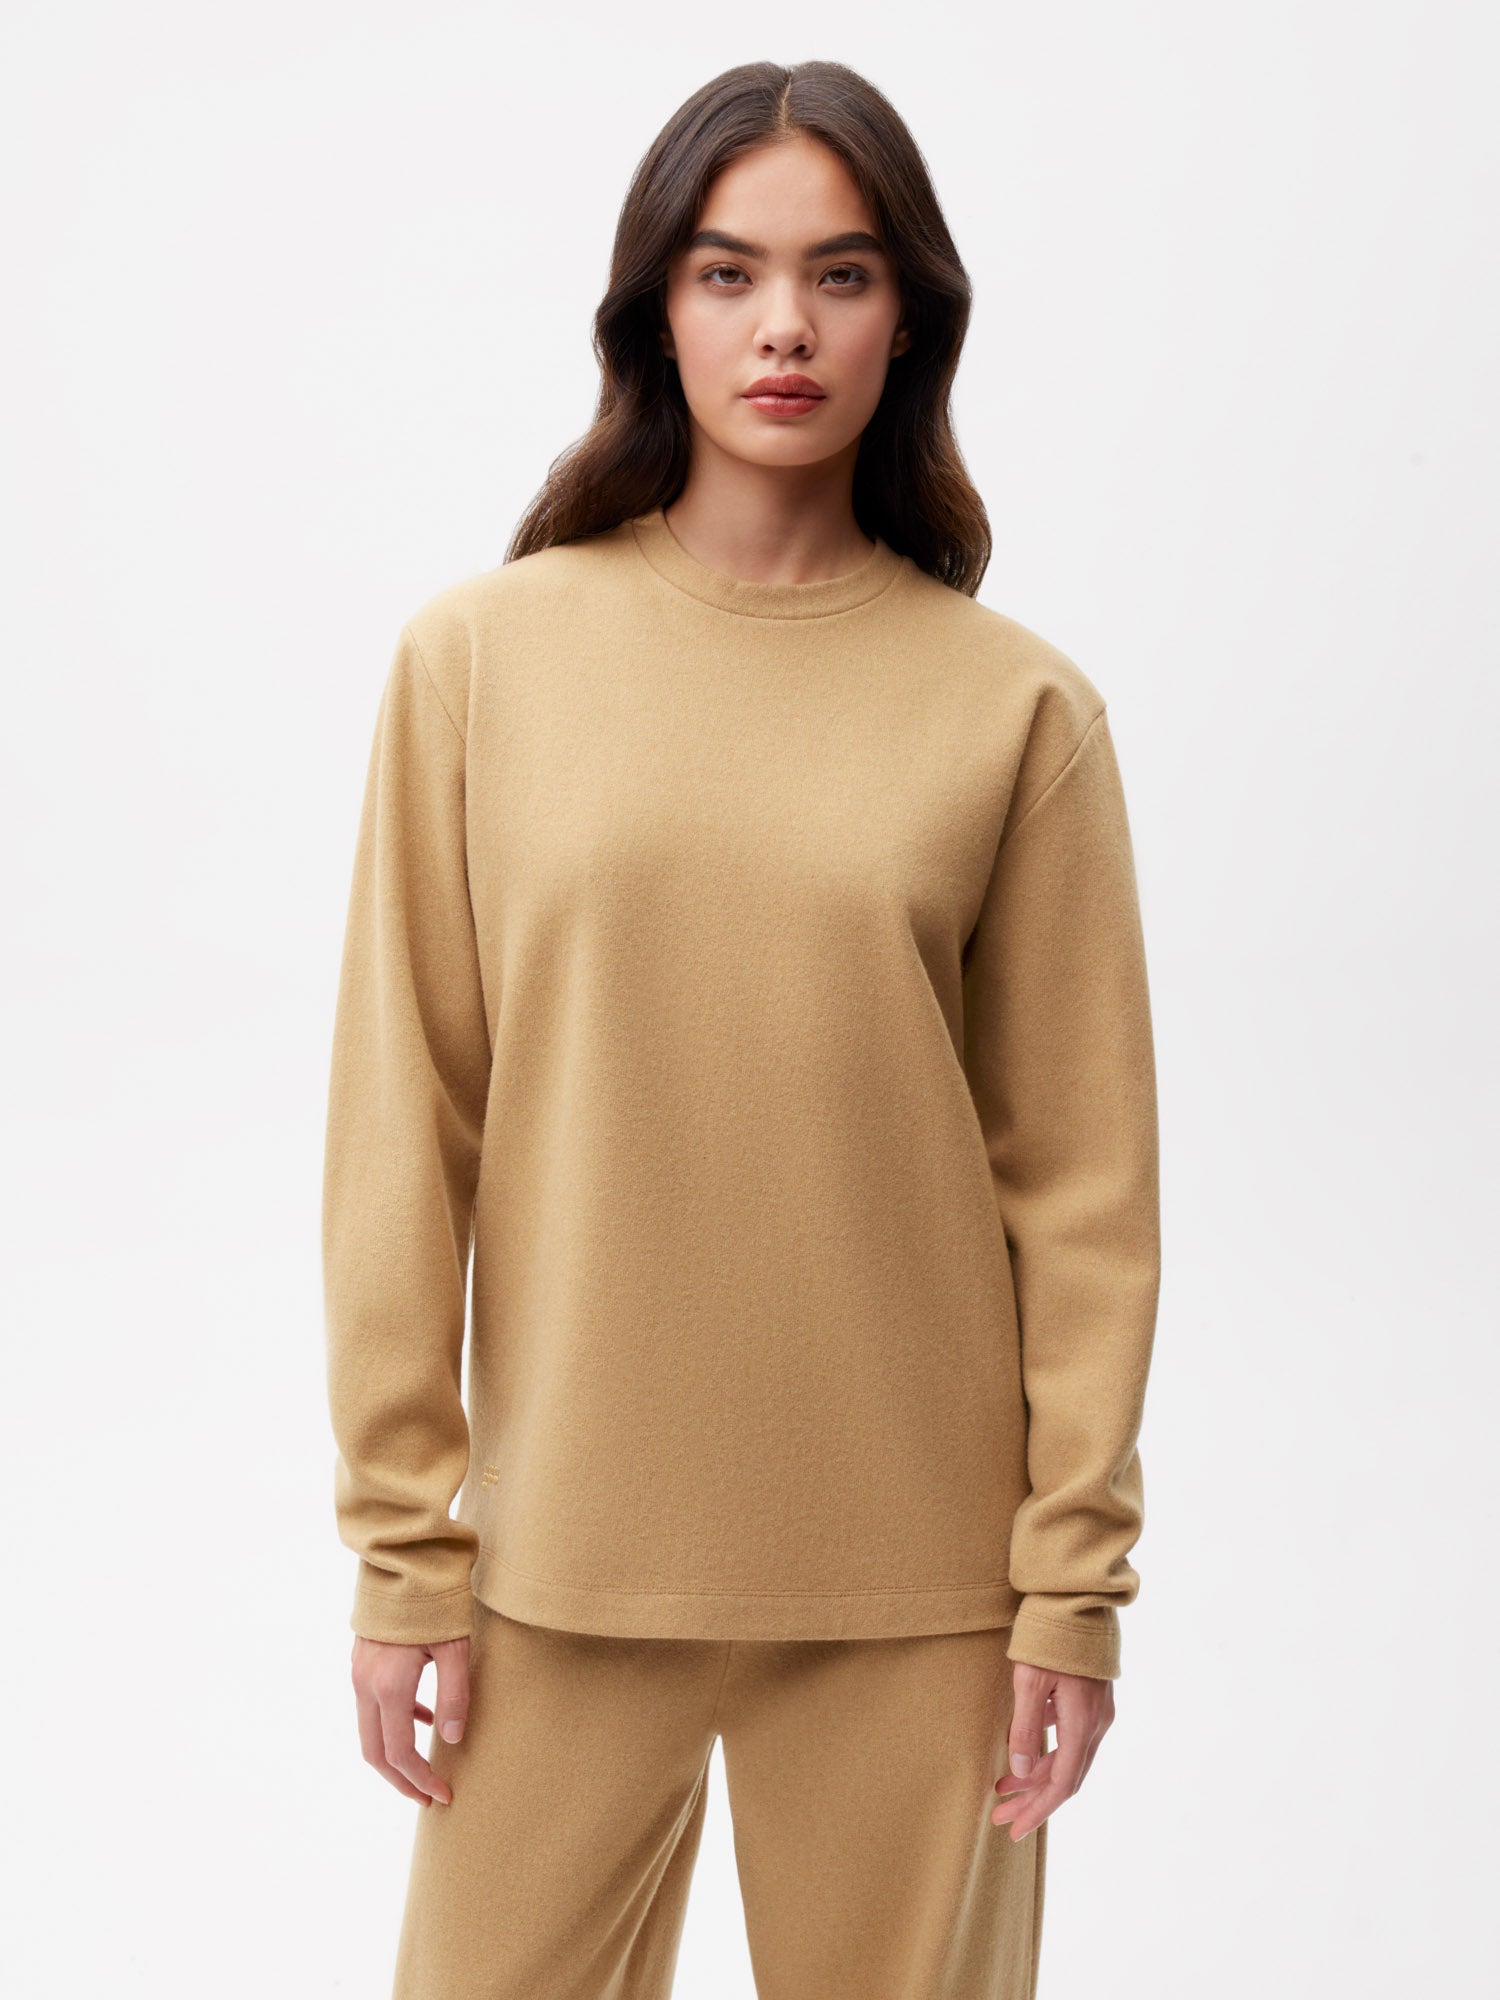 Recycled-Wool-Jersey-Long-Sleeves-T-Shirt-Camel-Female-1